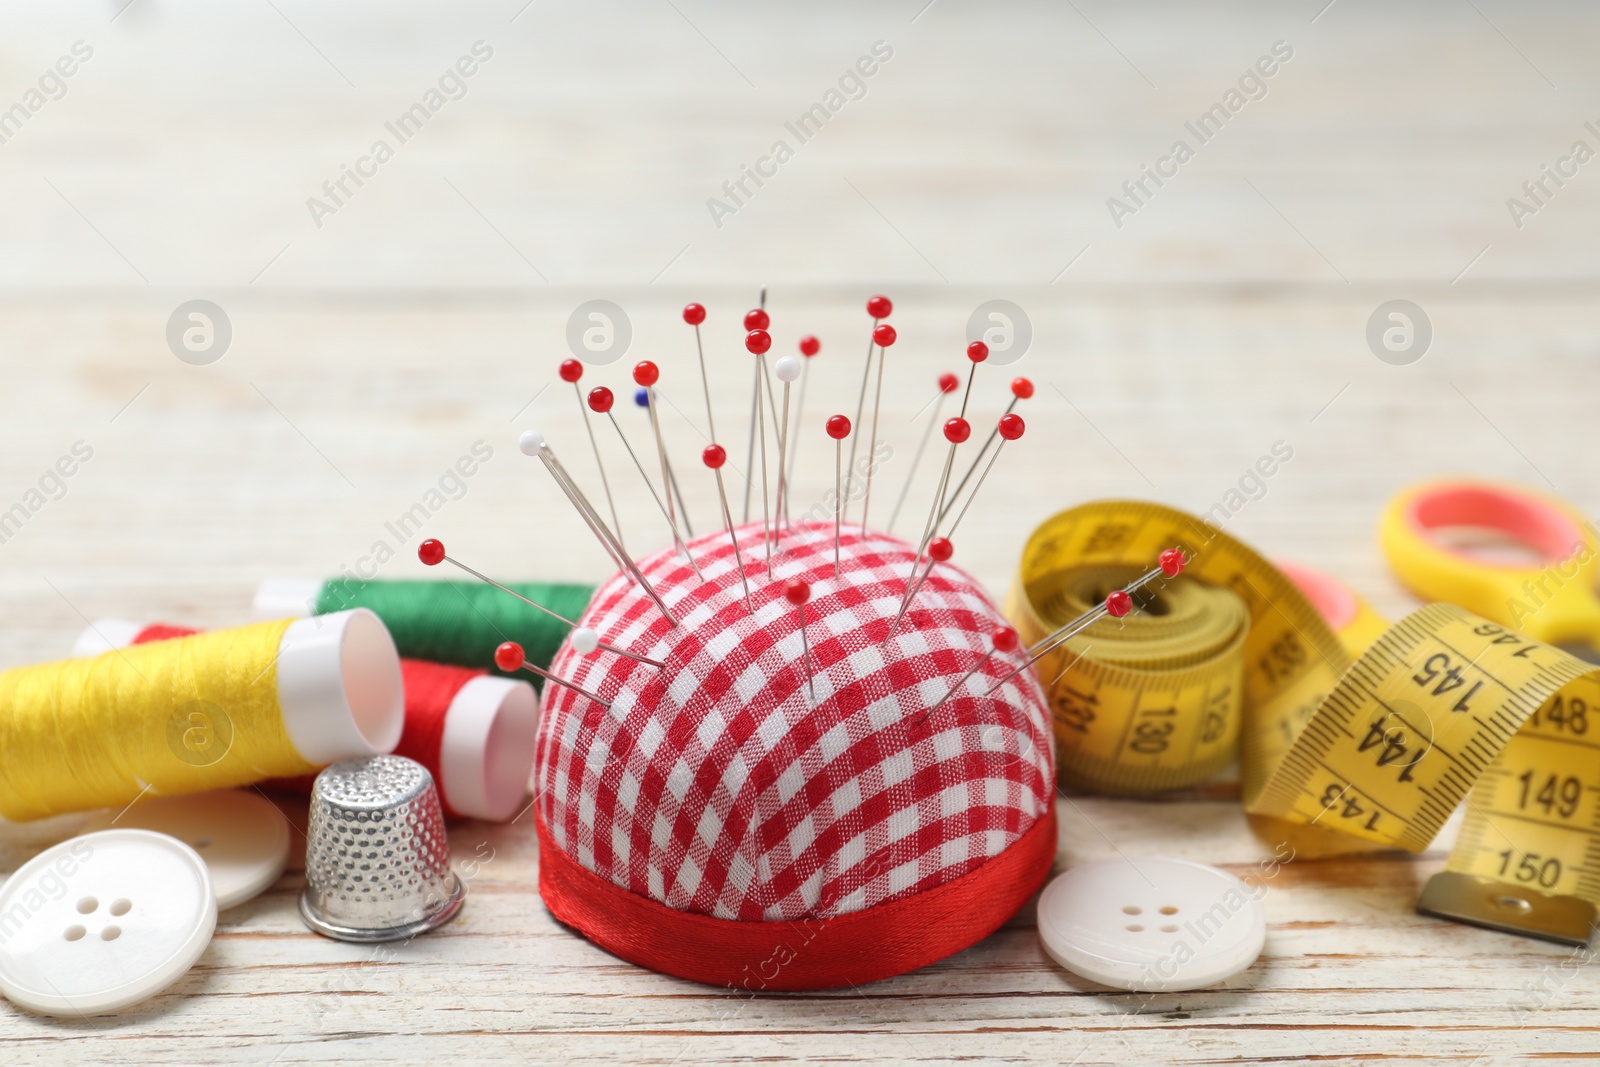 Photo of Checkered pincushion with pins and other sewing tools on light wooden table